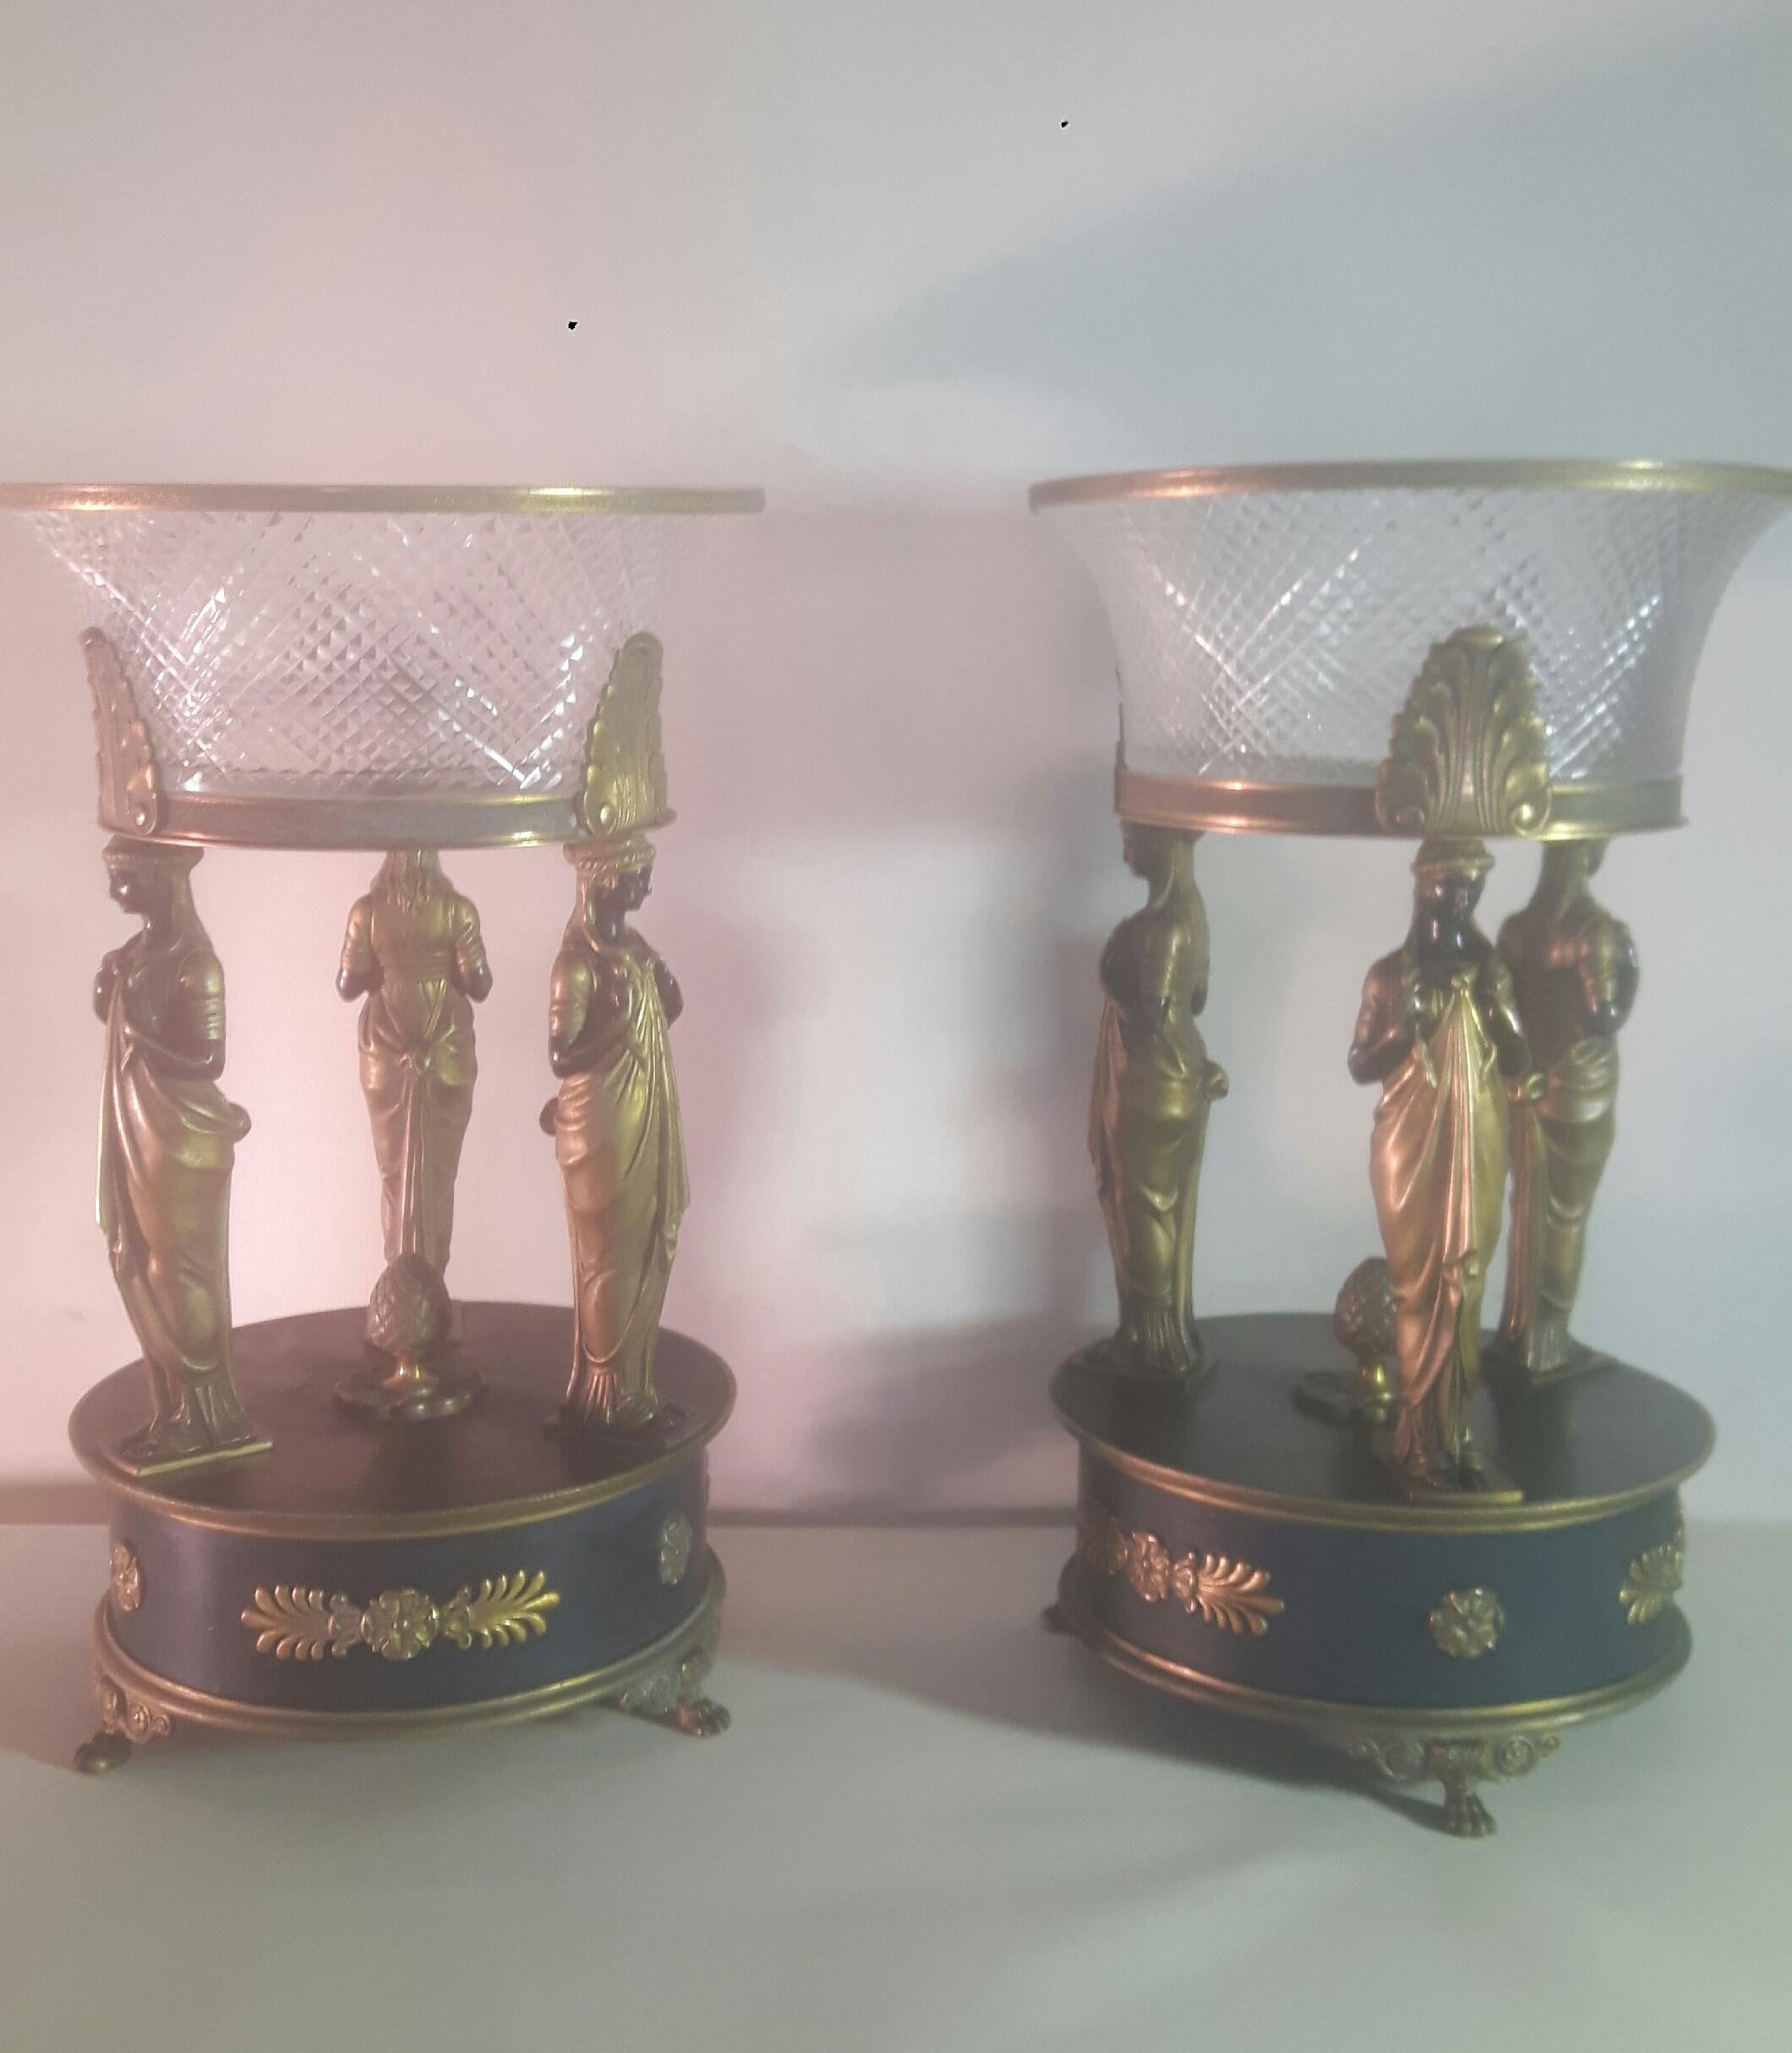 A fine large pair of 19th century French Empire bronze center pieces modeled as classical figures holding a loft acanthus capped crystal bowls.